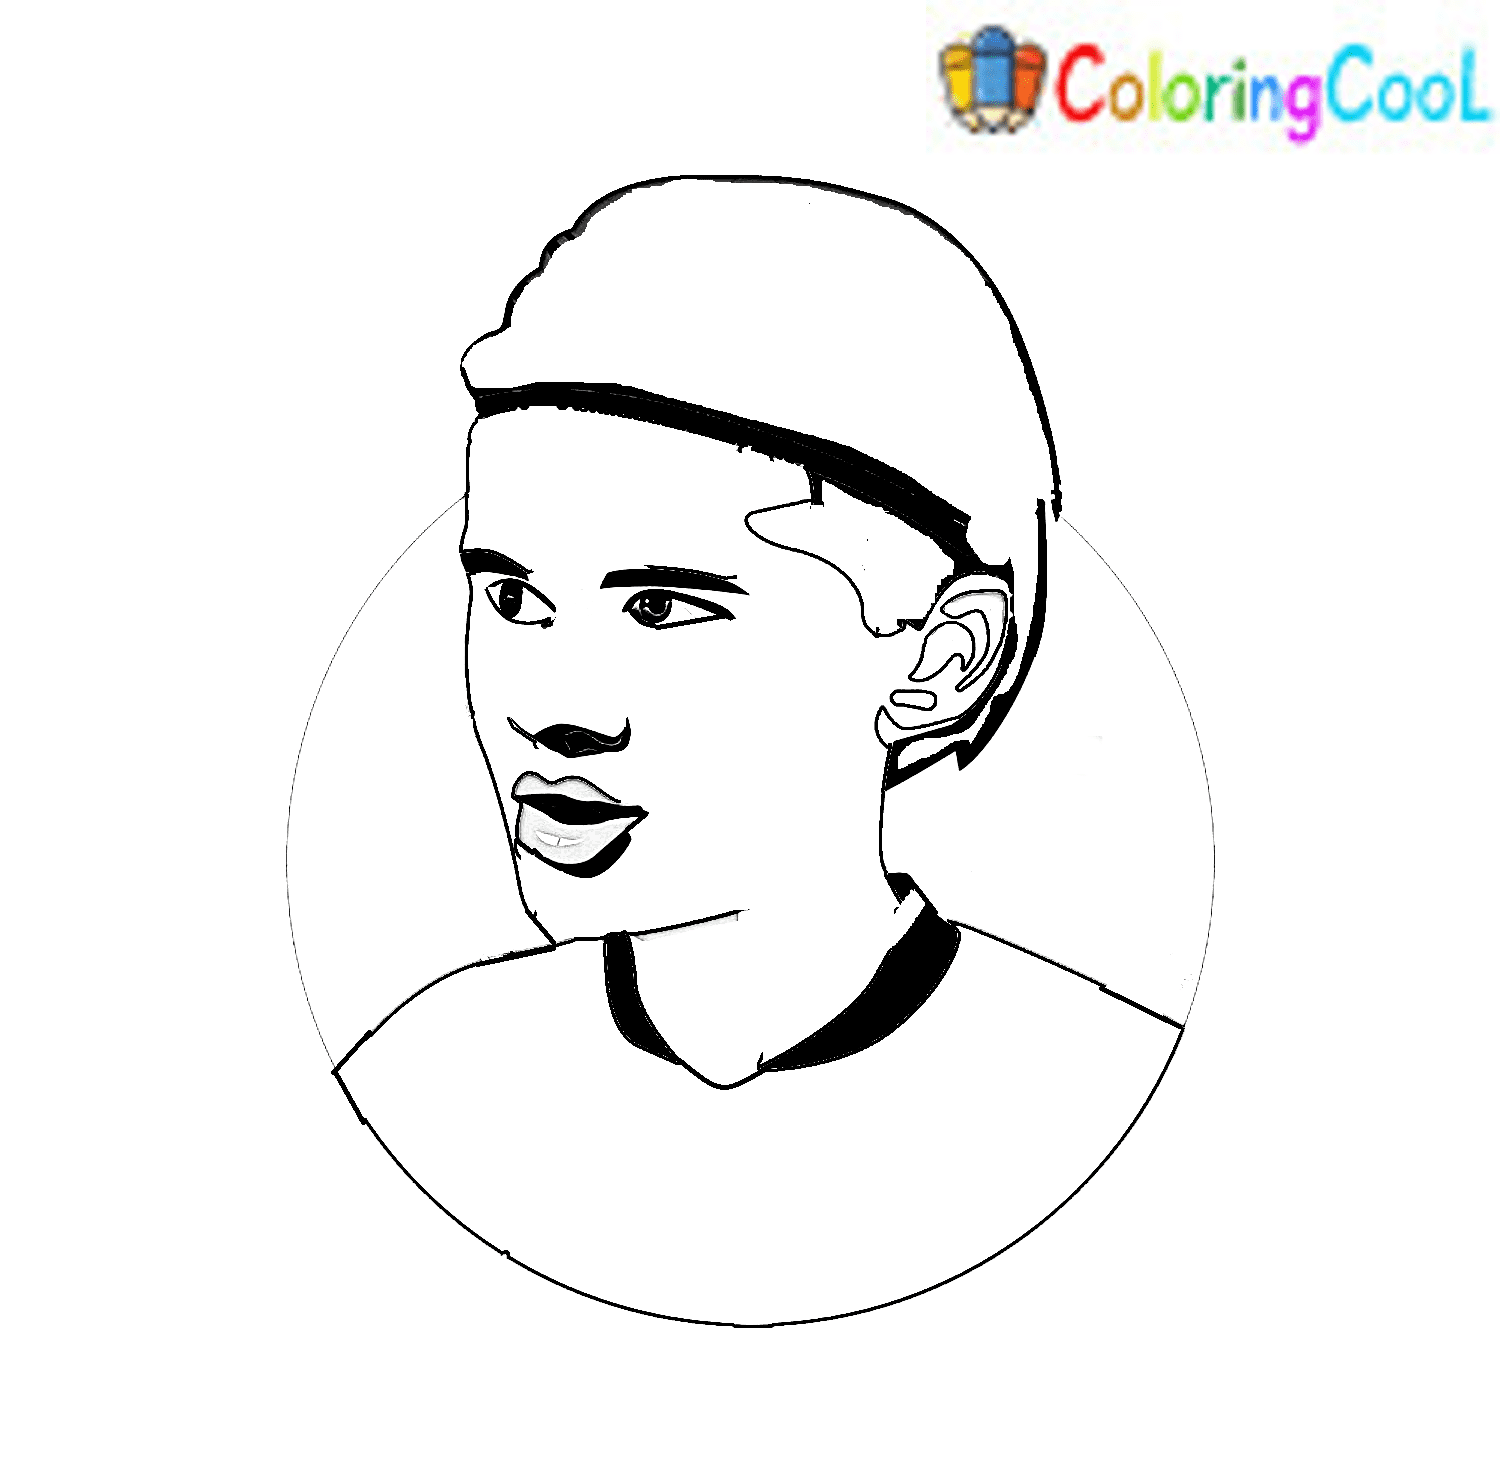 Erling Haaland Sweet Image Coloring Page